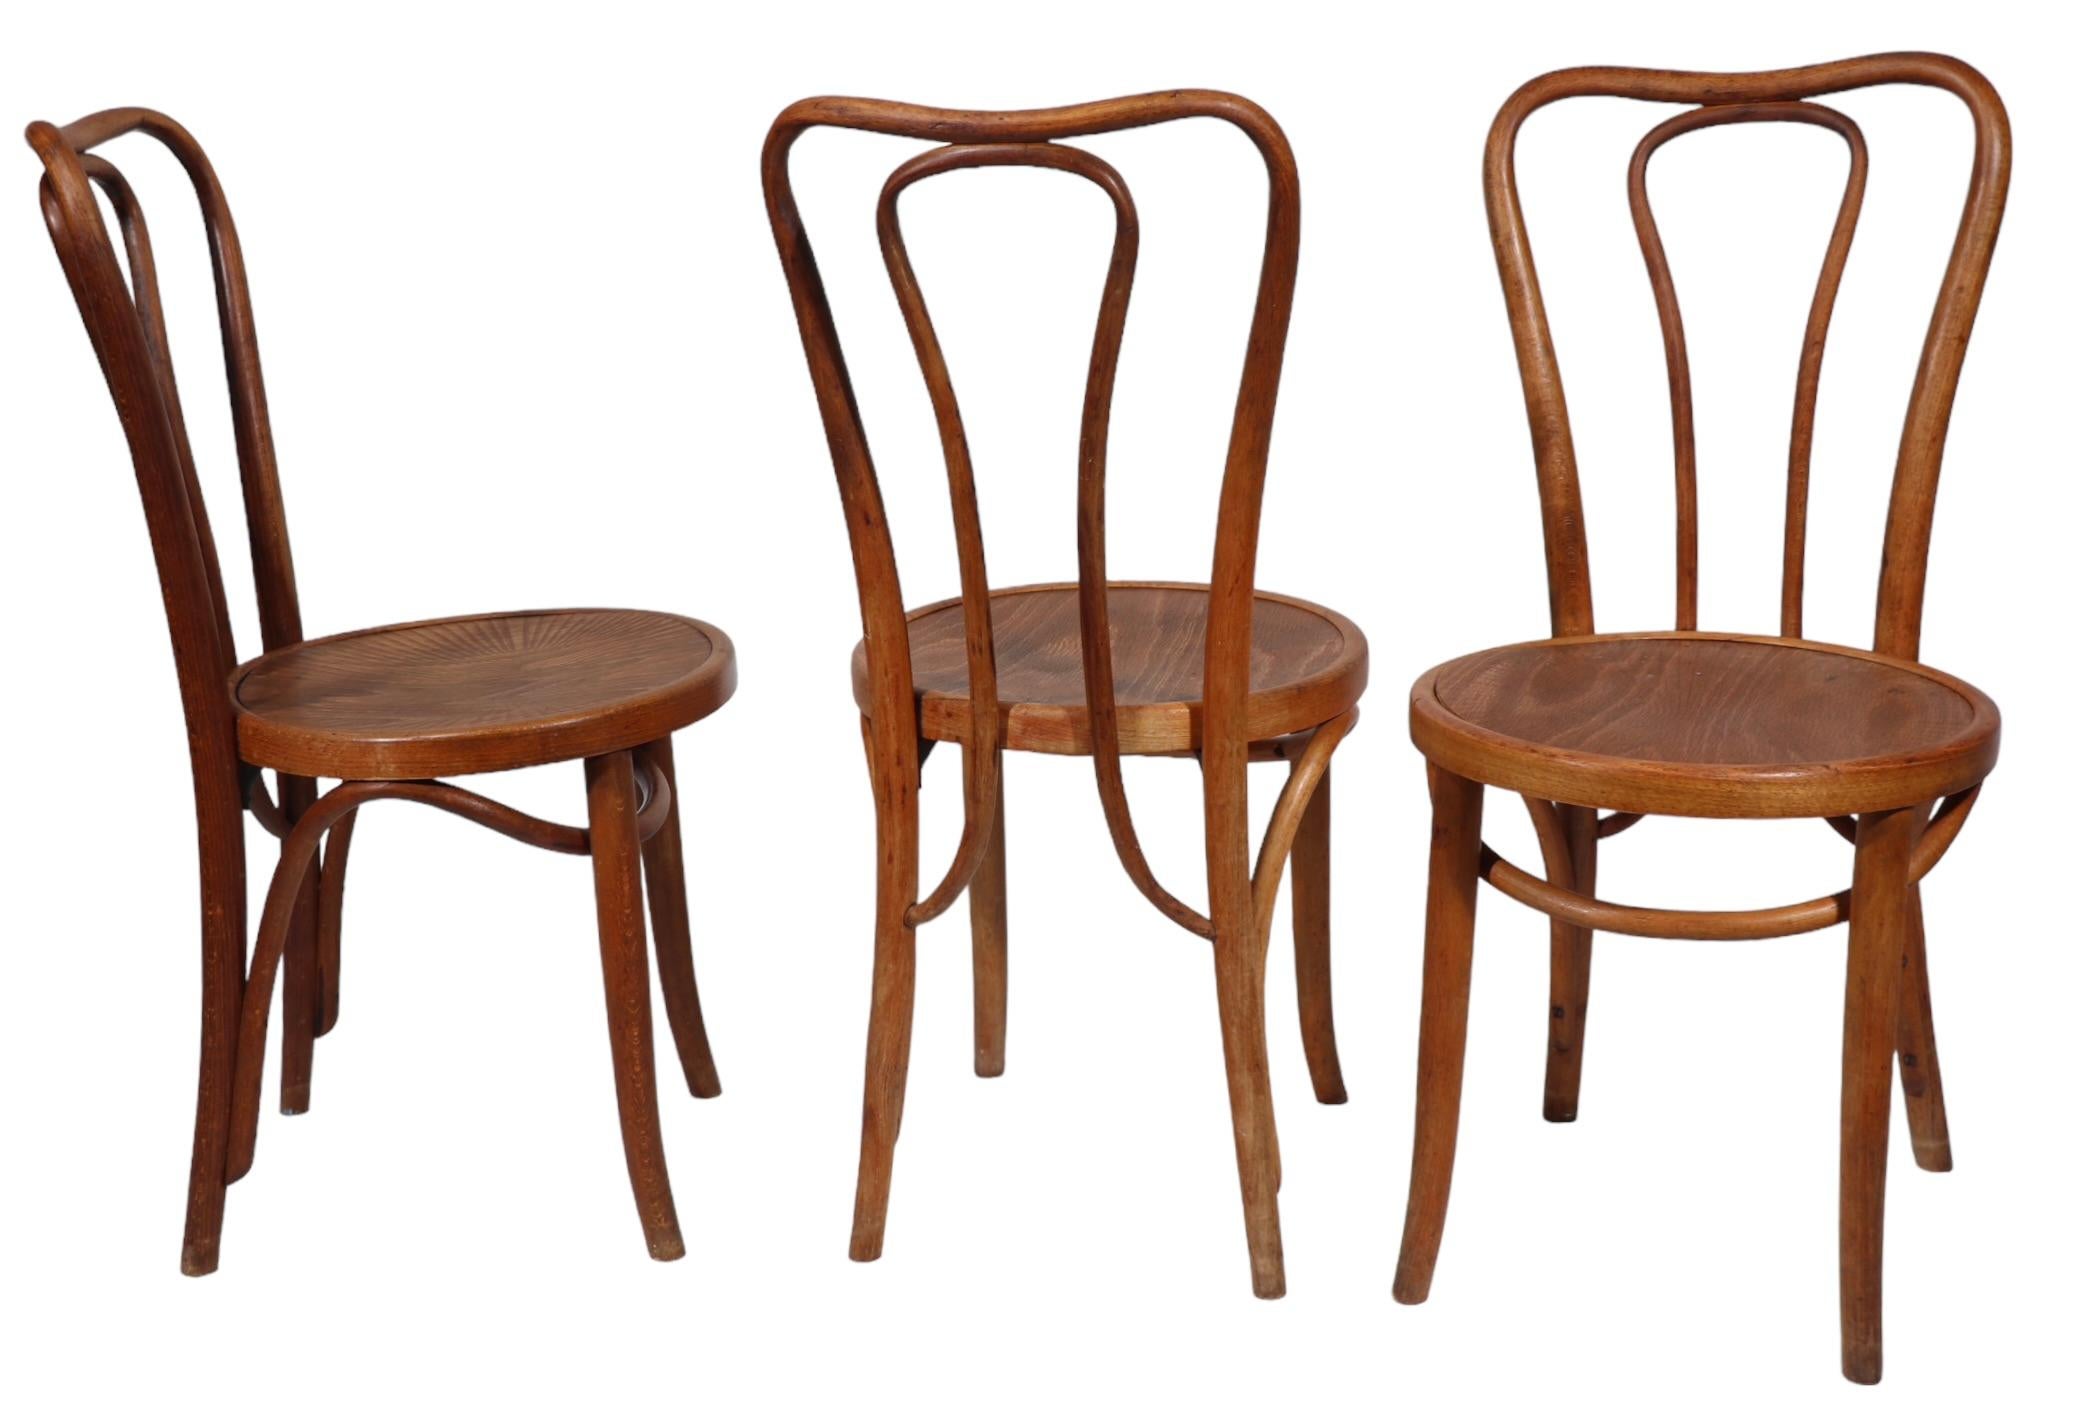 Beech Vienna Secessionist Bentwood Chairs att. to Thonet  Made in Poland 3 available 